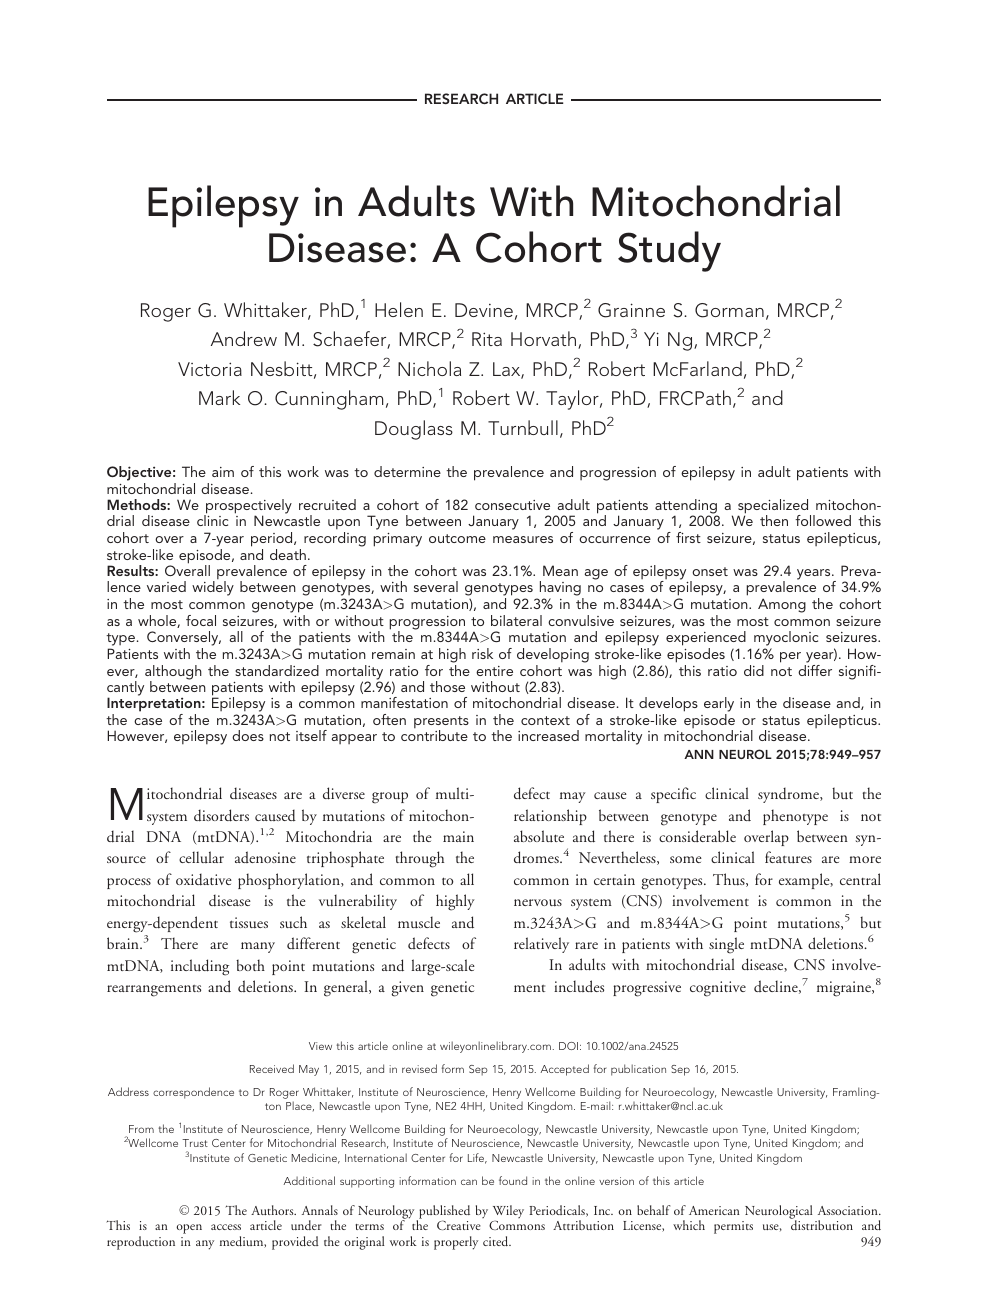 Epilepsy In Adults With Mitochondrial Disease A Cohort Study Topic Of Research Paper In Clinical Medicine Download Scholarly Article Pdf And Read For Free On Cyberleninka Open Science Hub